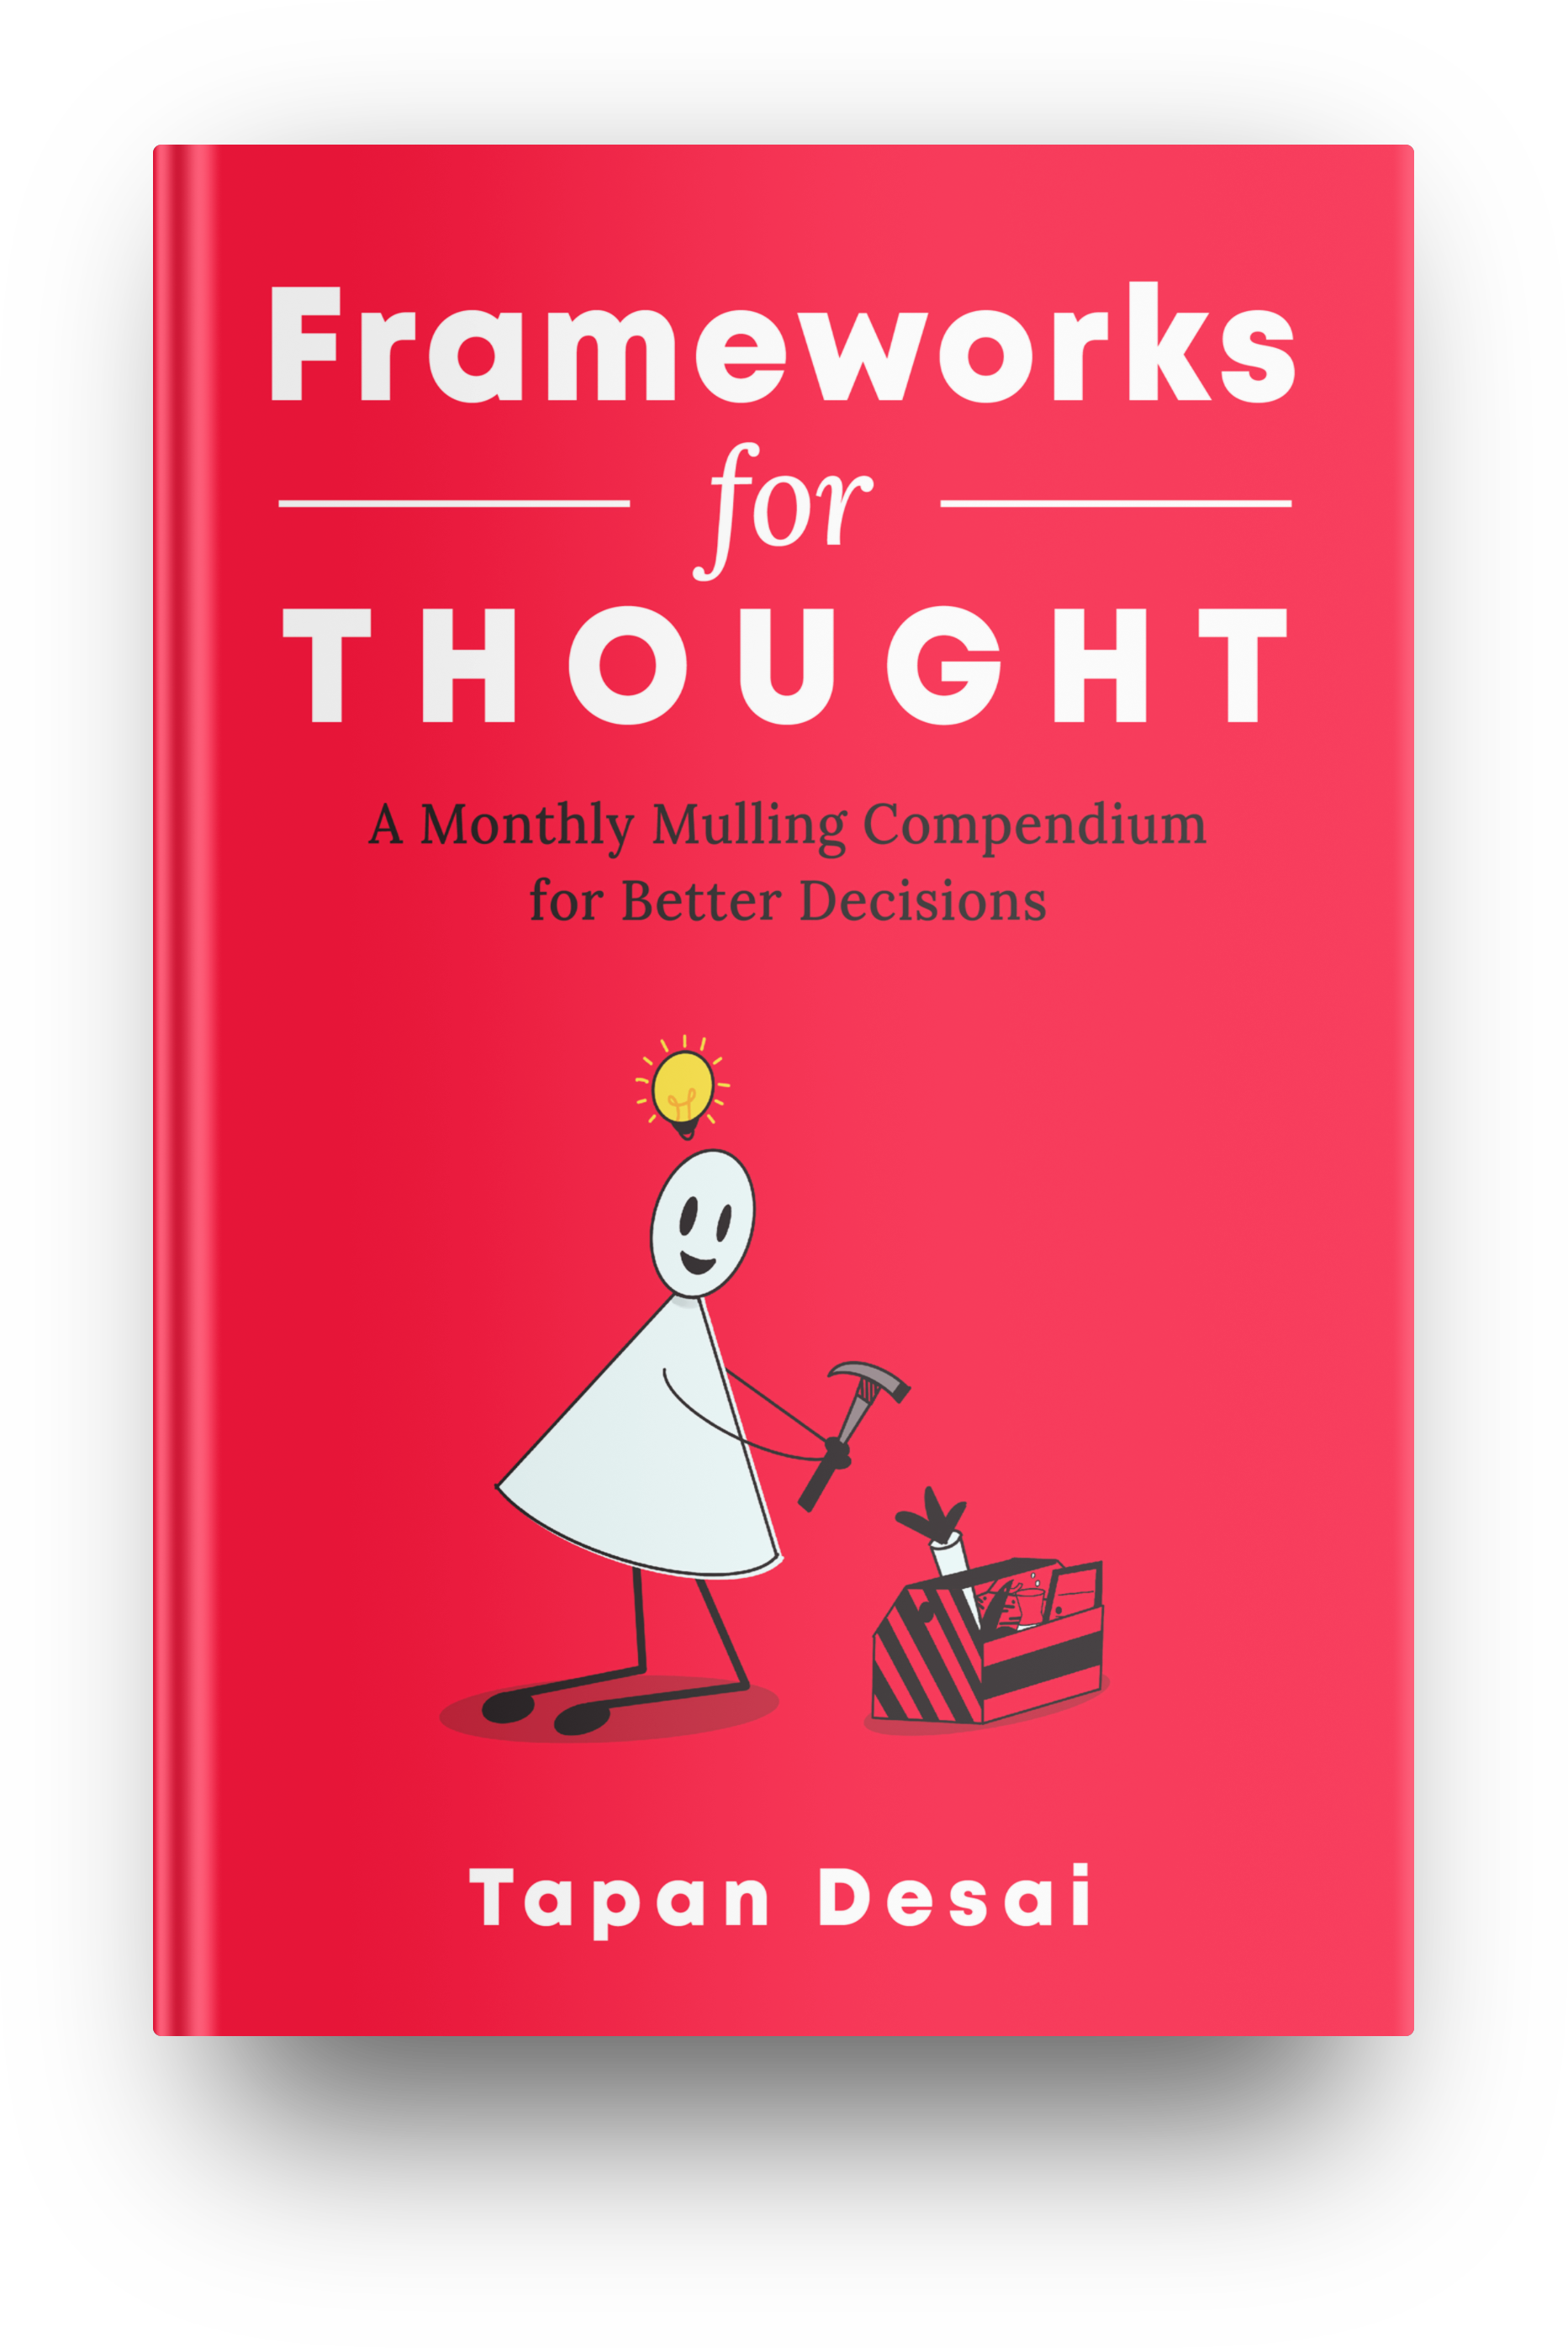 Frameworks for Thought - A book by Tapan Desai